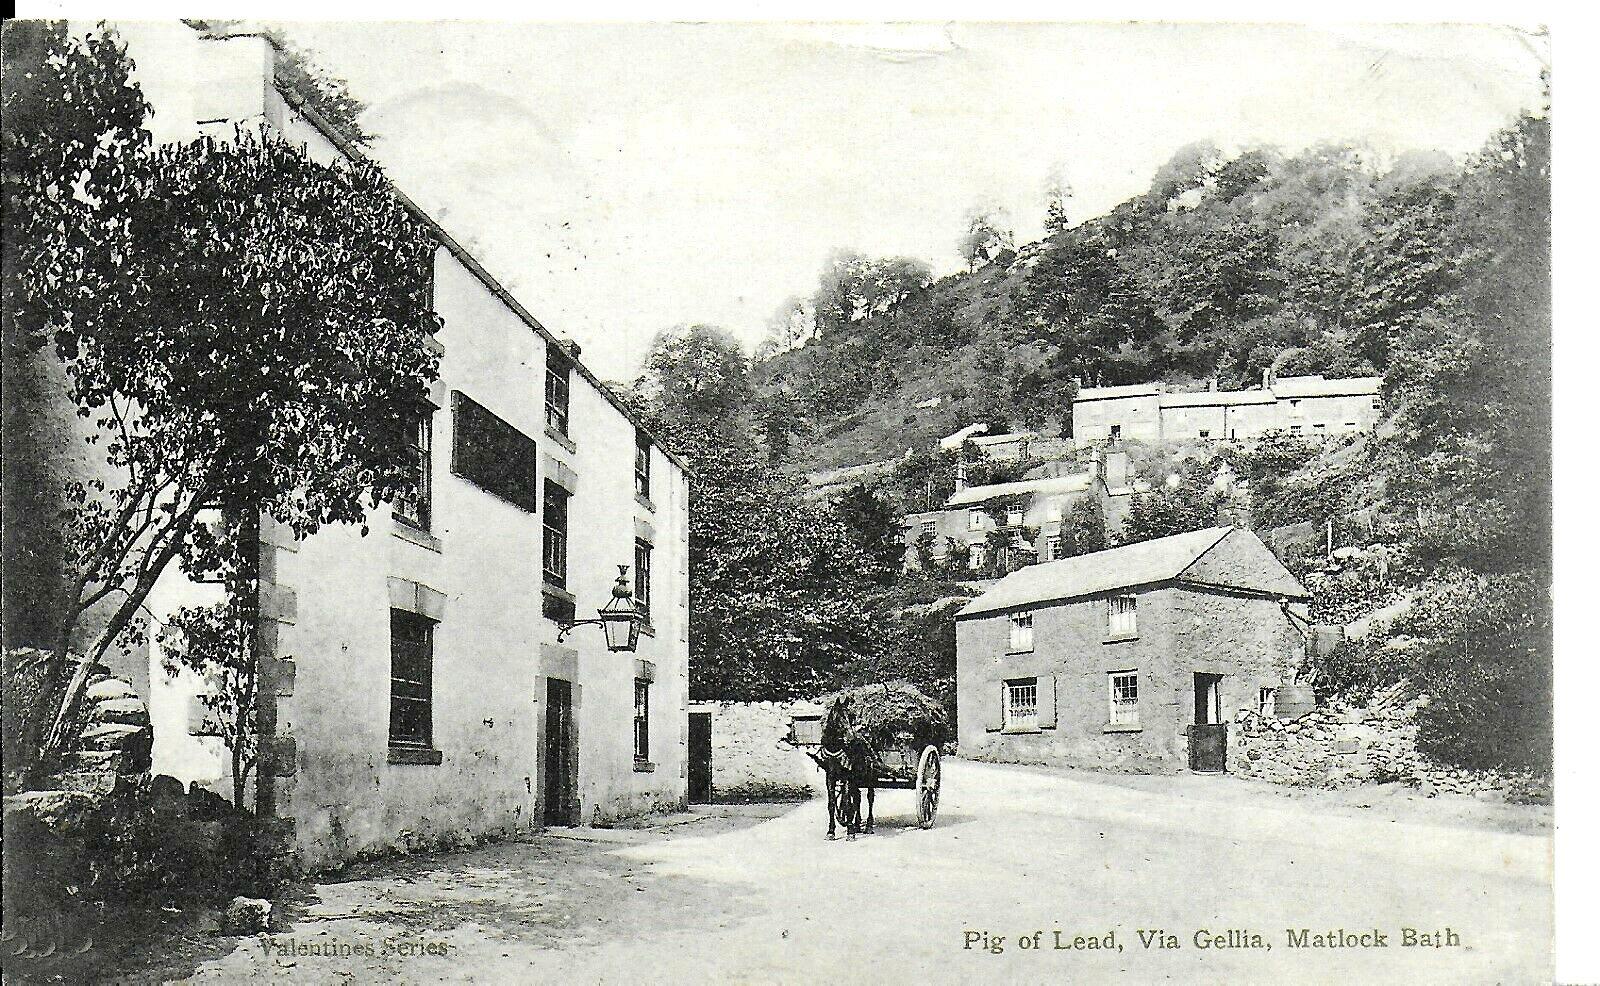 The Pig of Lead 1904